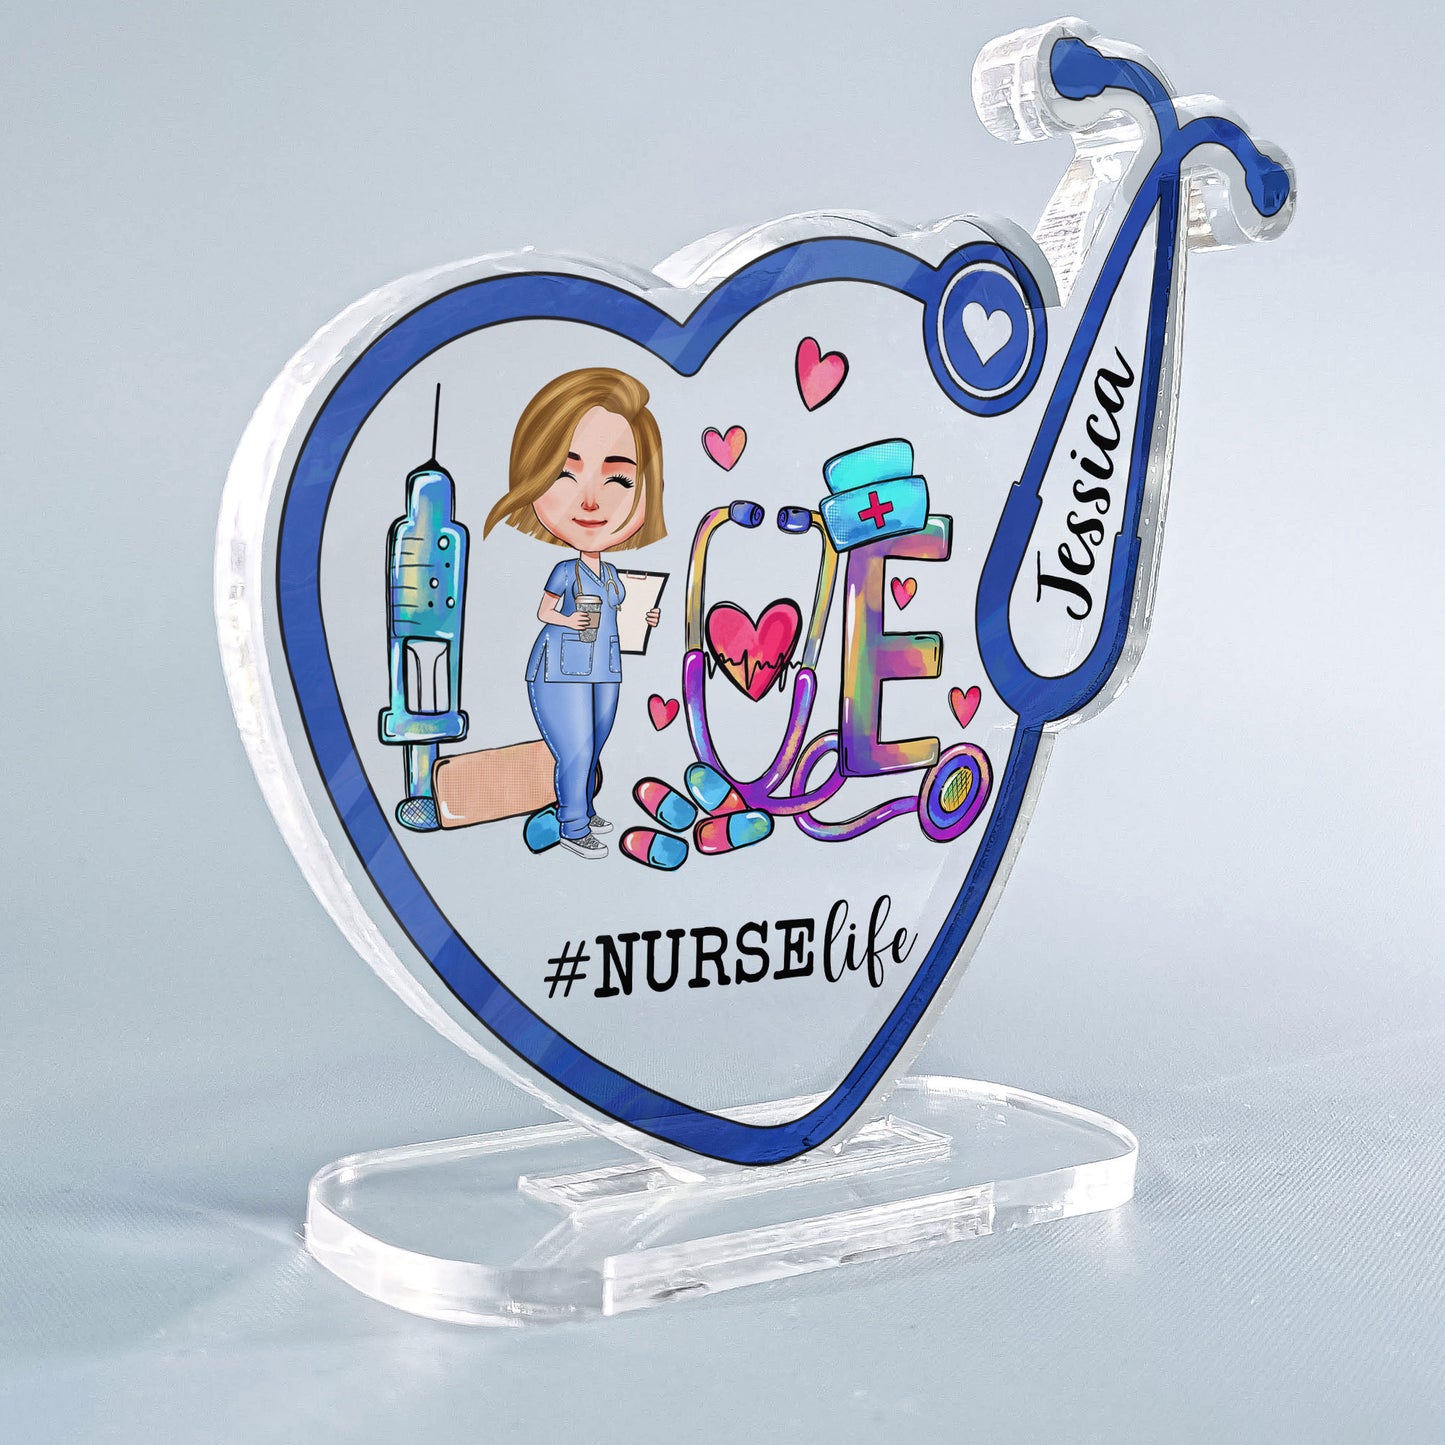 Love #Nurselife - Personalized Stethoscope Shaped Acrylic Plaque - Birthday Gift For Doctor, Nurse